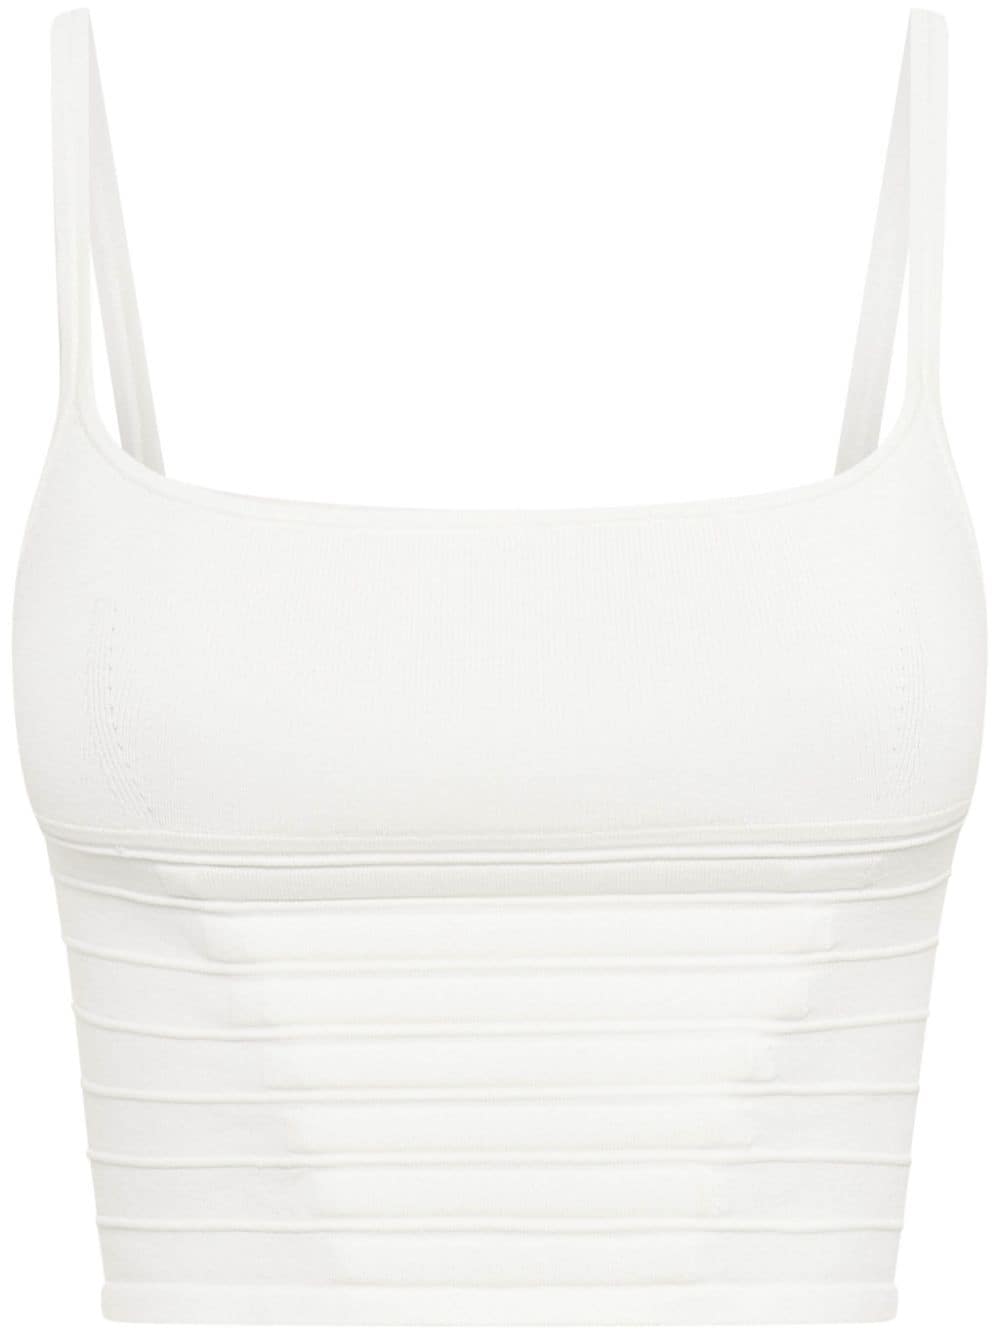 Dion Lee Ventral Compact cropped top - White von Dion Lee